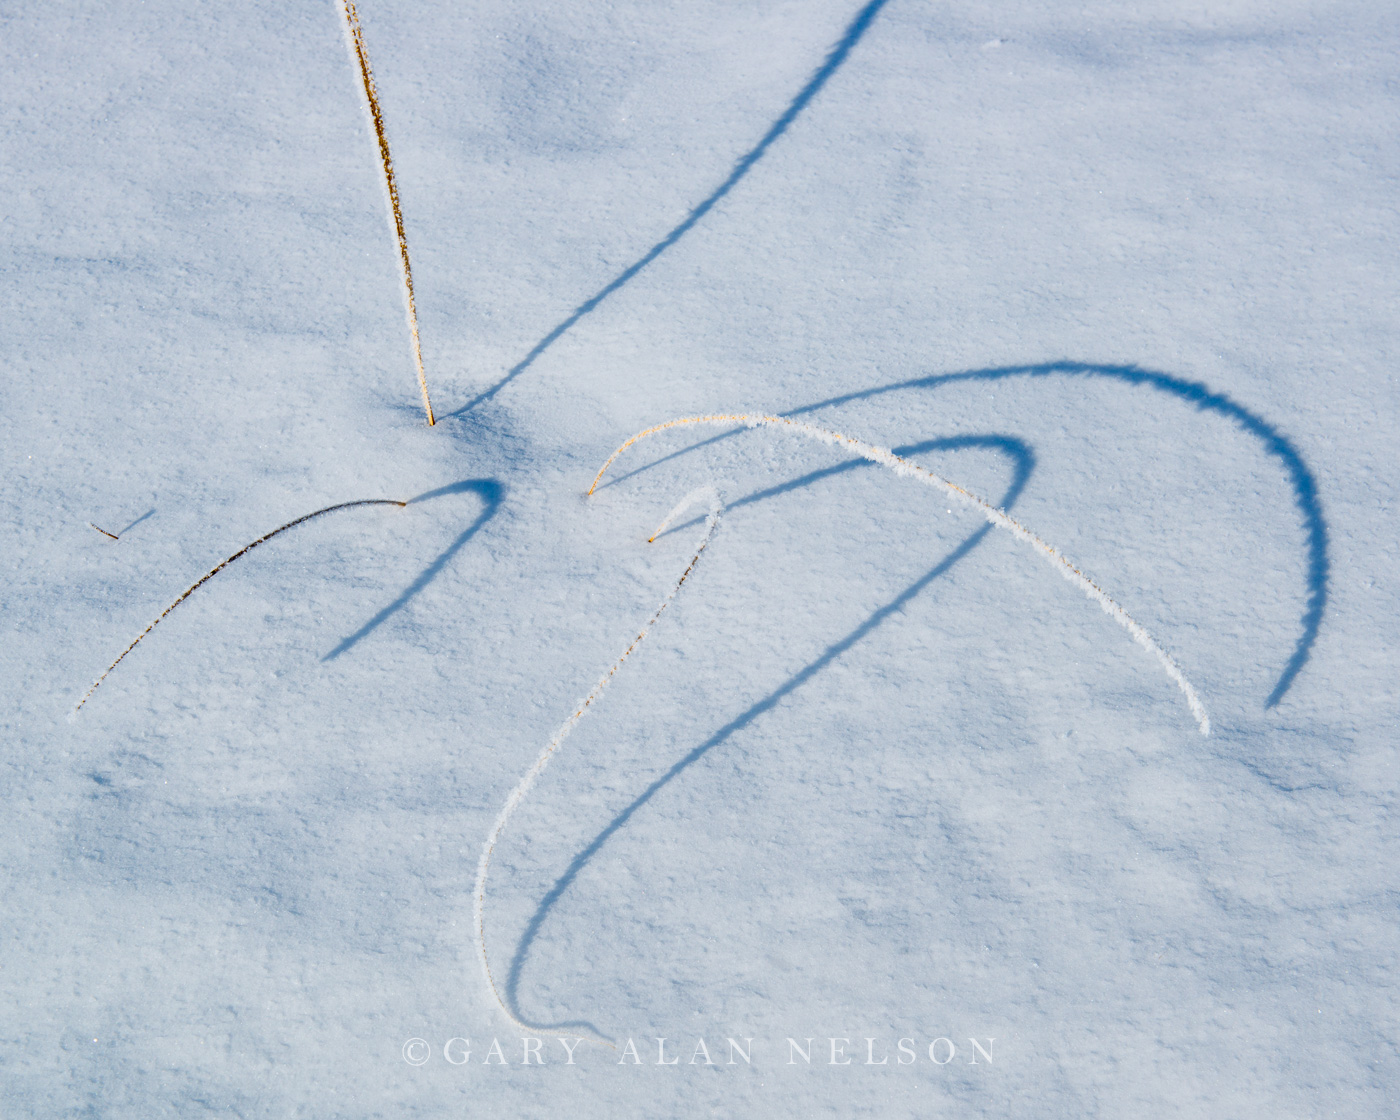 Hoar frost covered grasses and shadows, the Plover Prairie, Nature Conservancy, Minnesota